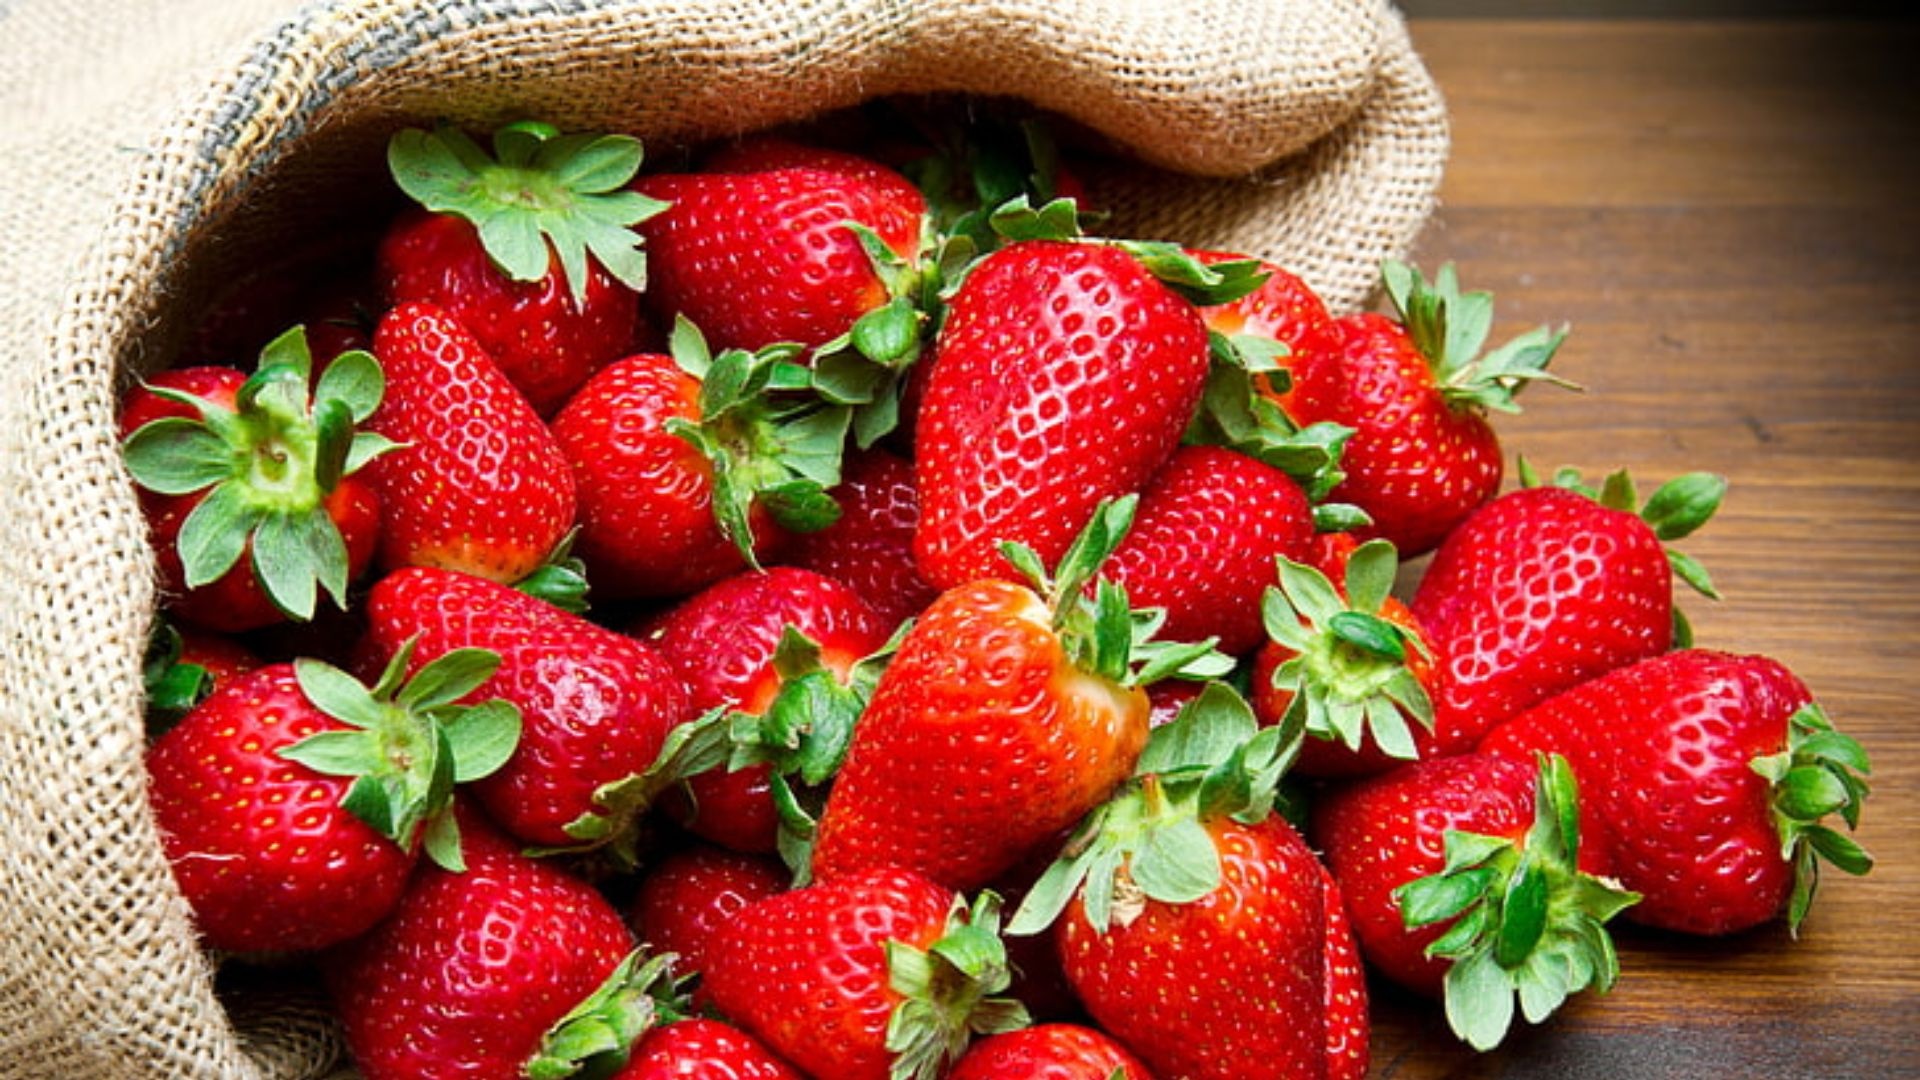 Strawberry: Red color of the fruits comes from natural pigments called anthocyanins. 1920x1080 Full HD Wallpaper.